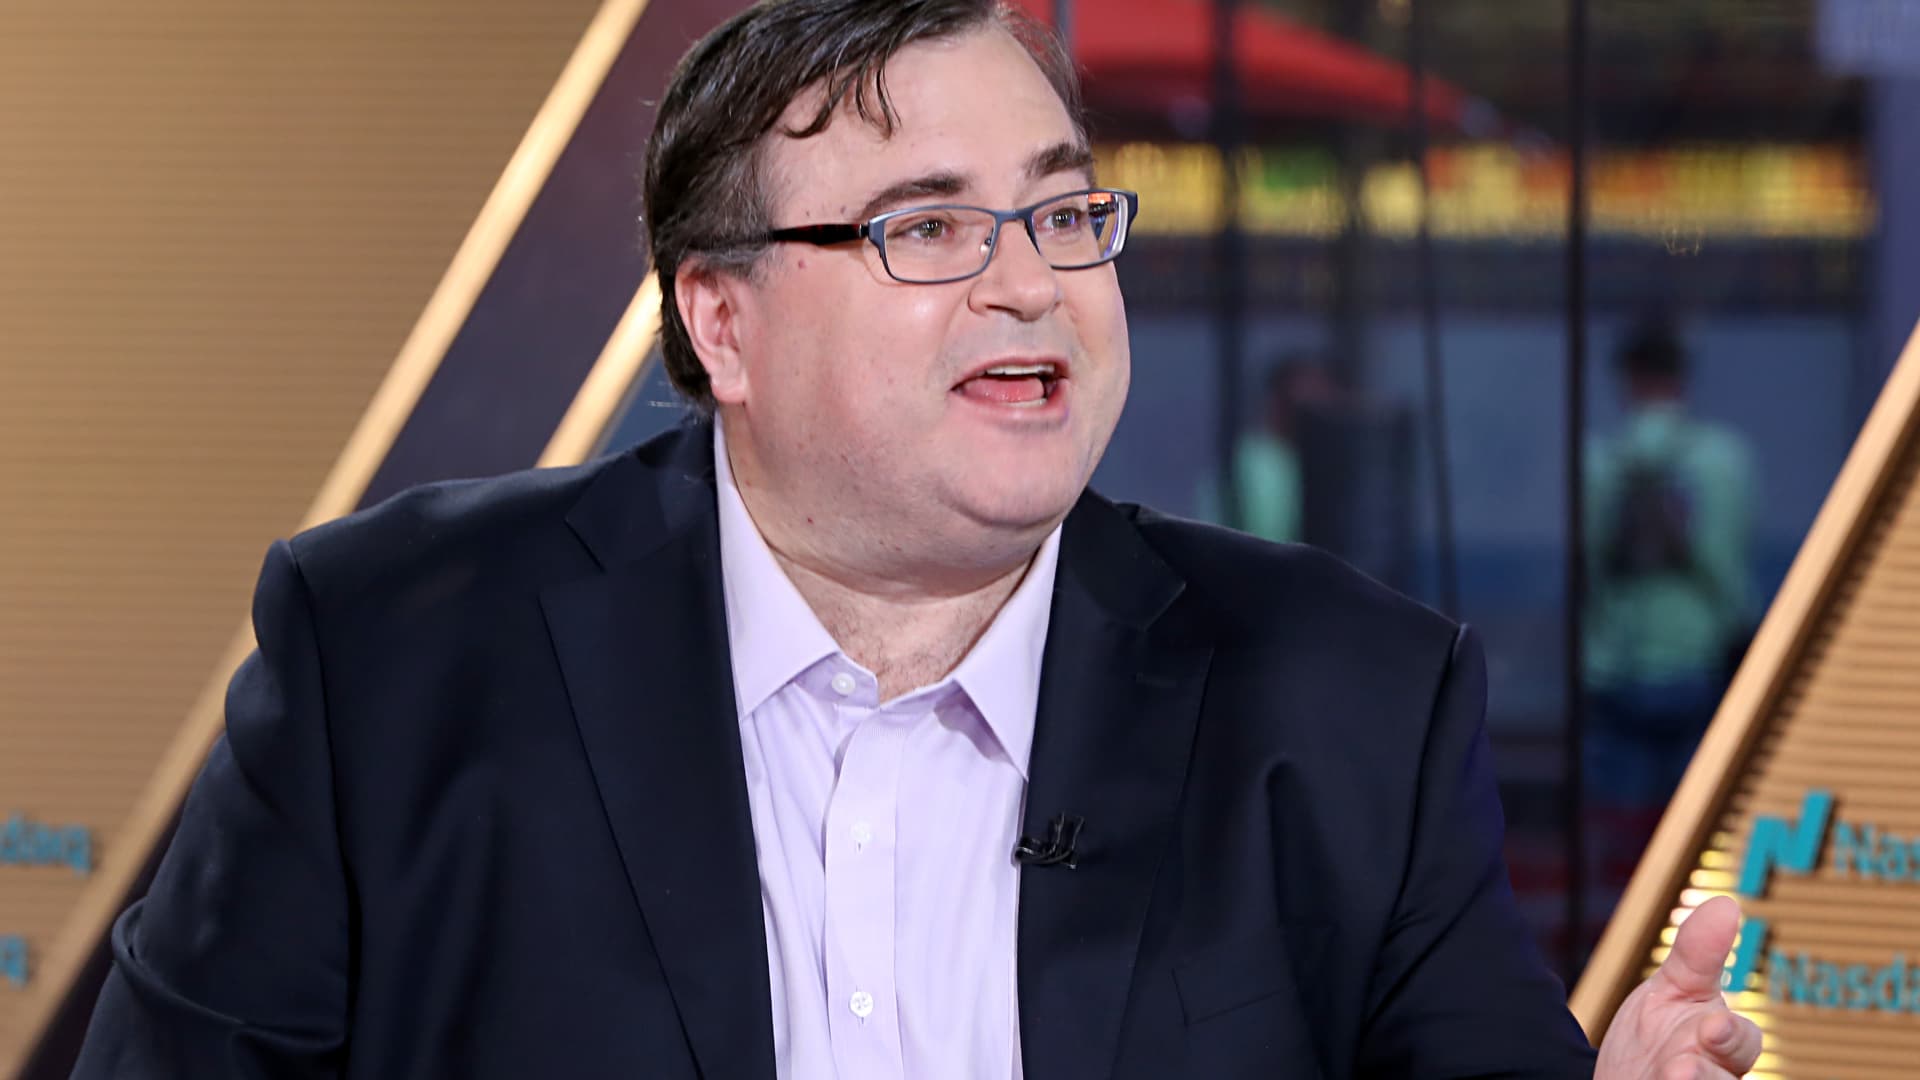 Reid Hoffman says we don't know why OpenAI board forced out Sam Altman